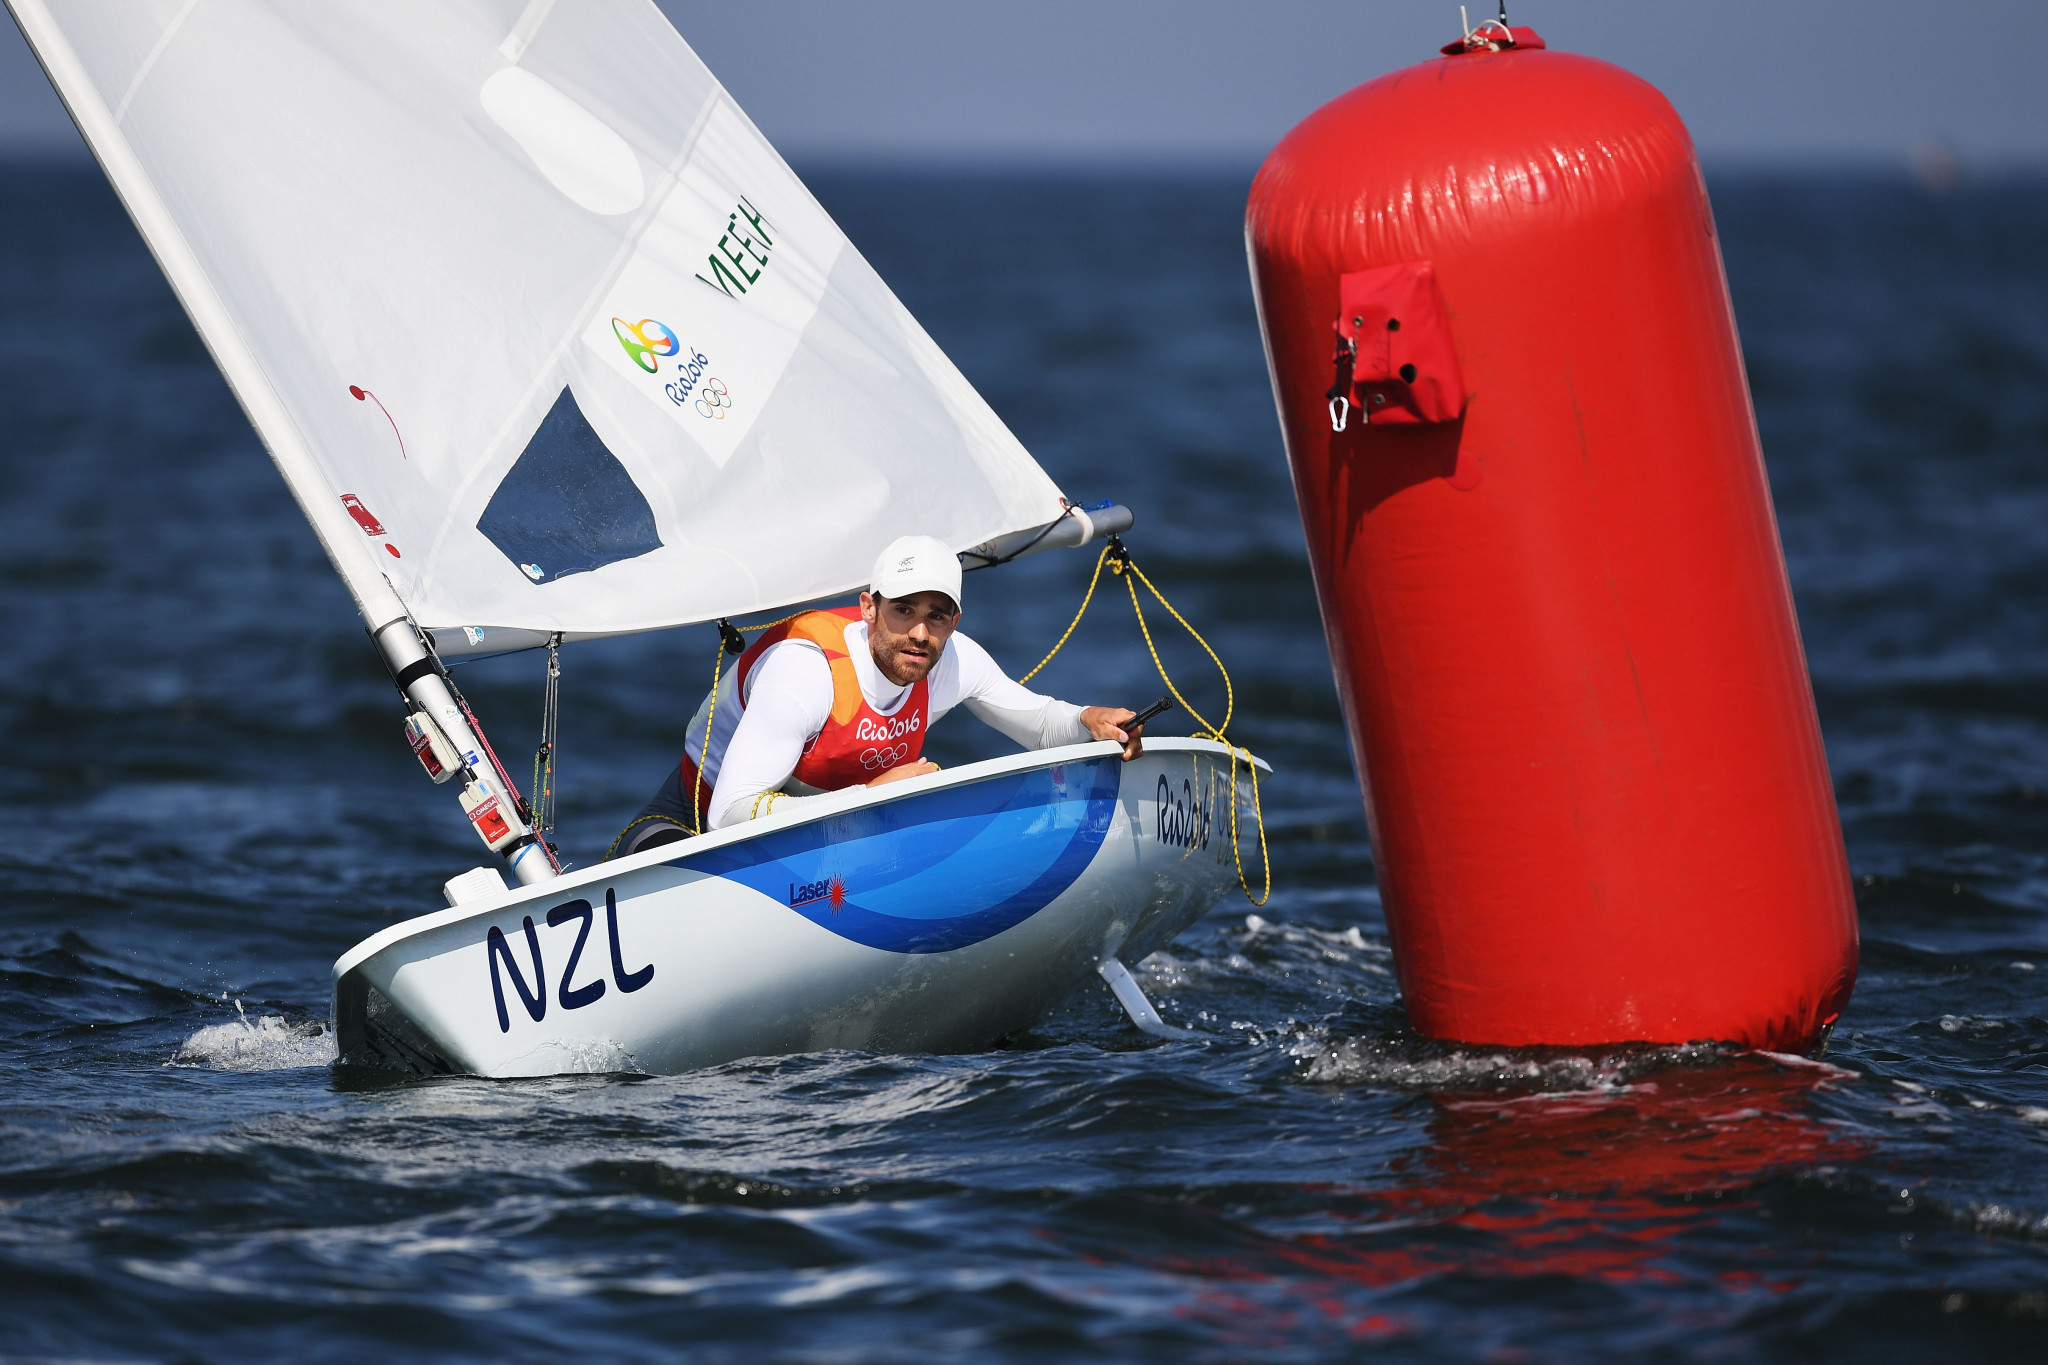 Wearn and Meech continue close battle at European Laser Championships